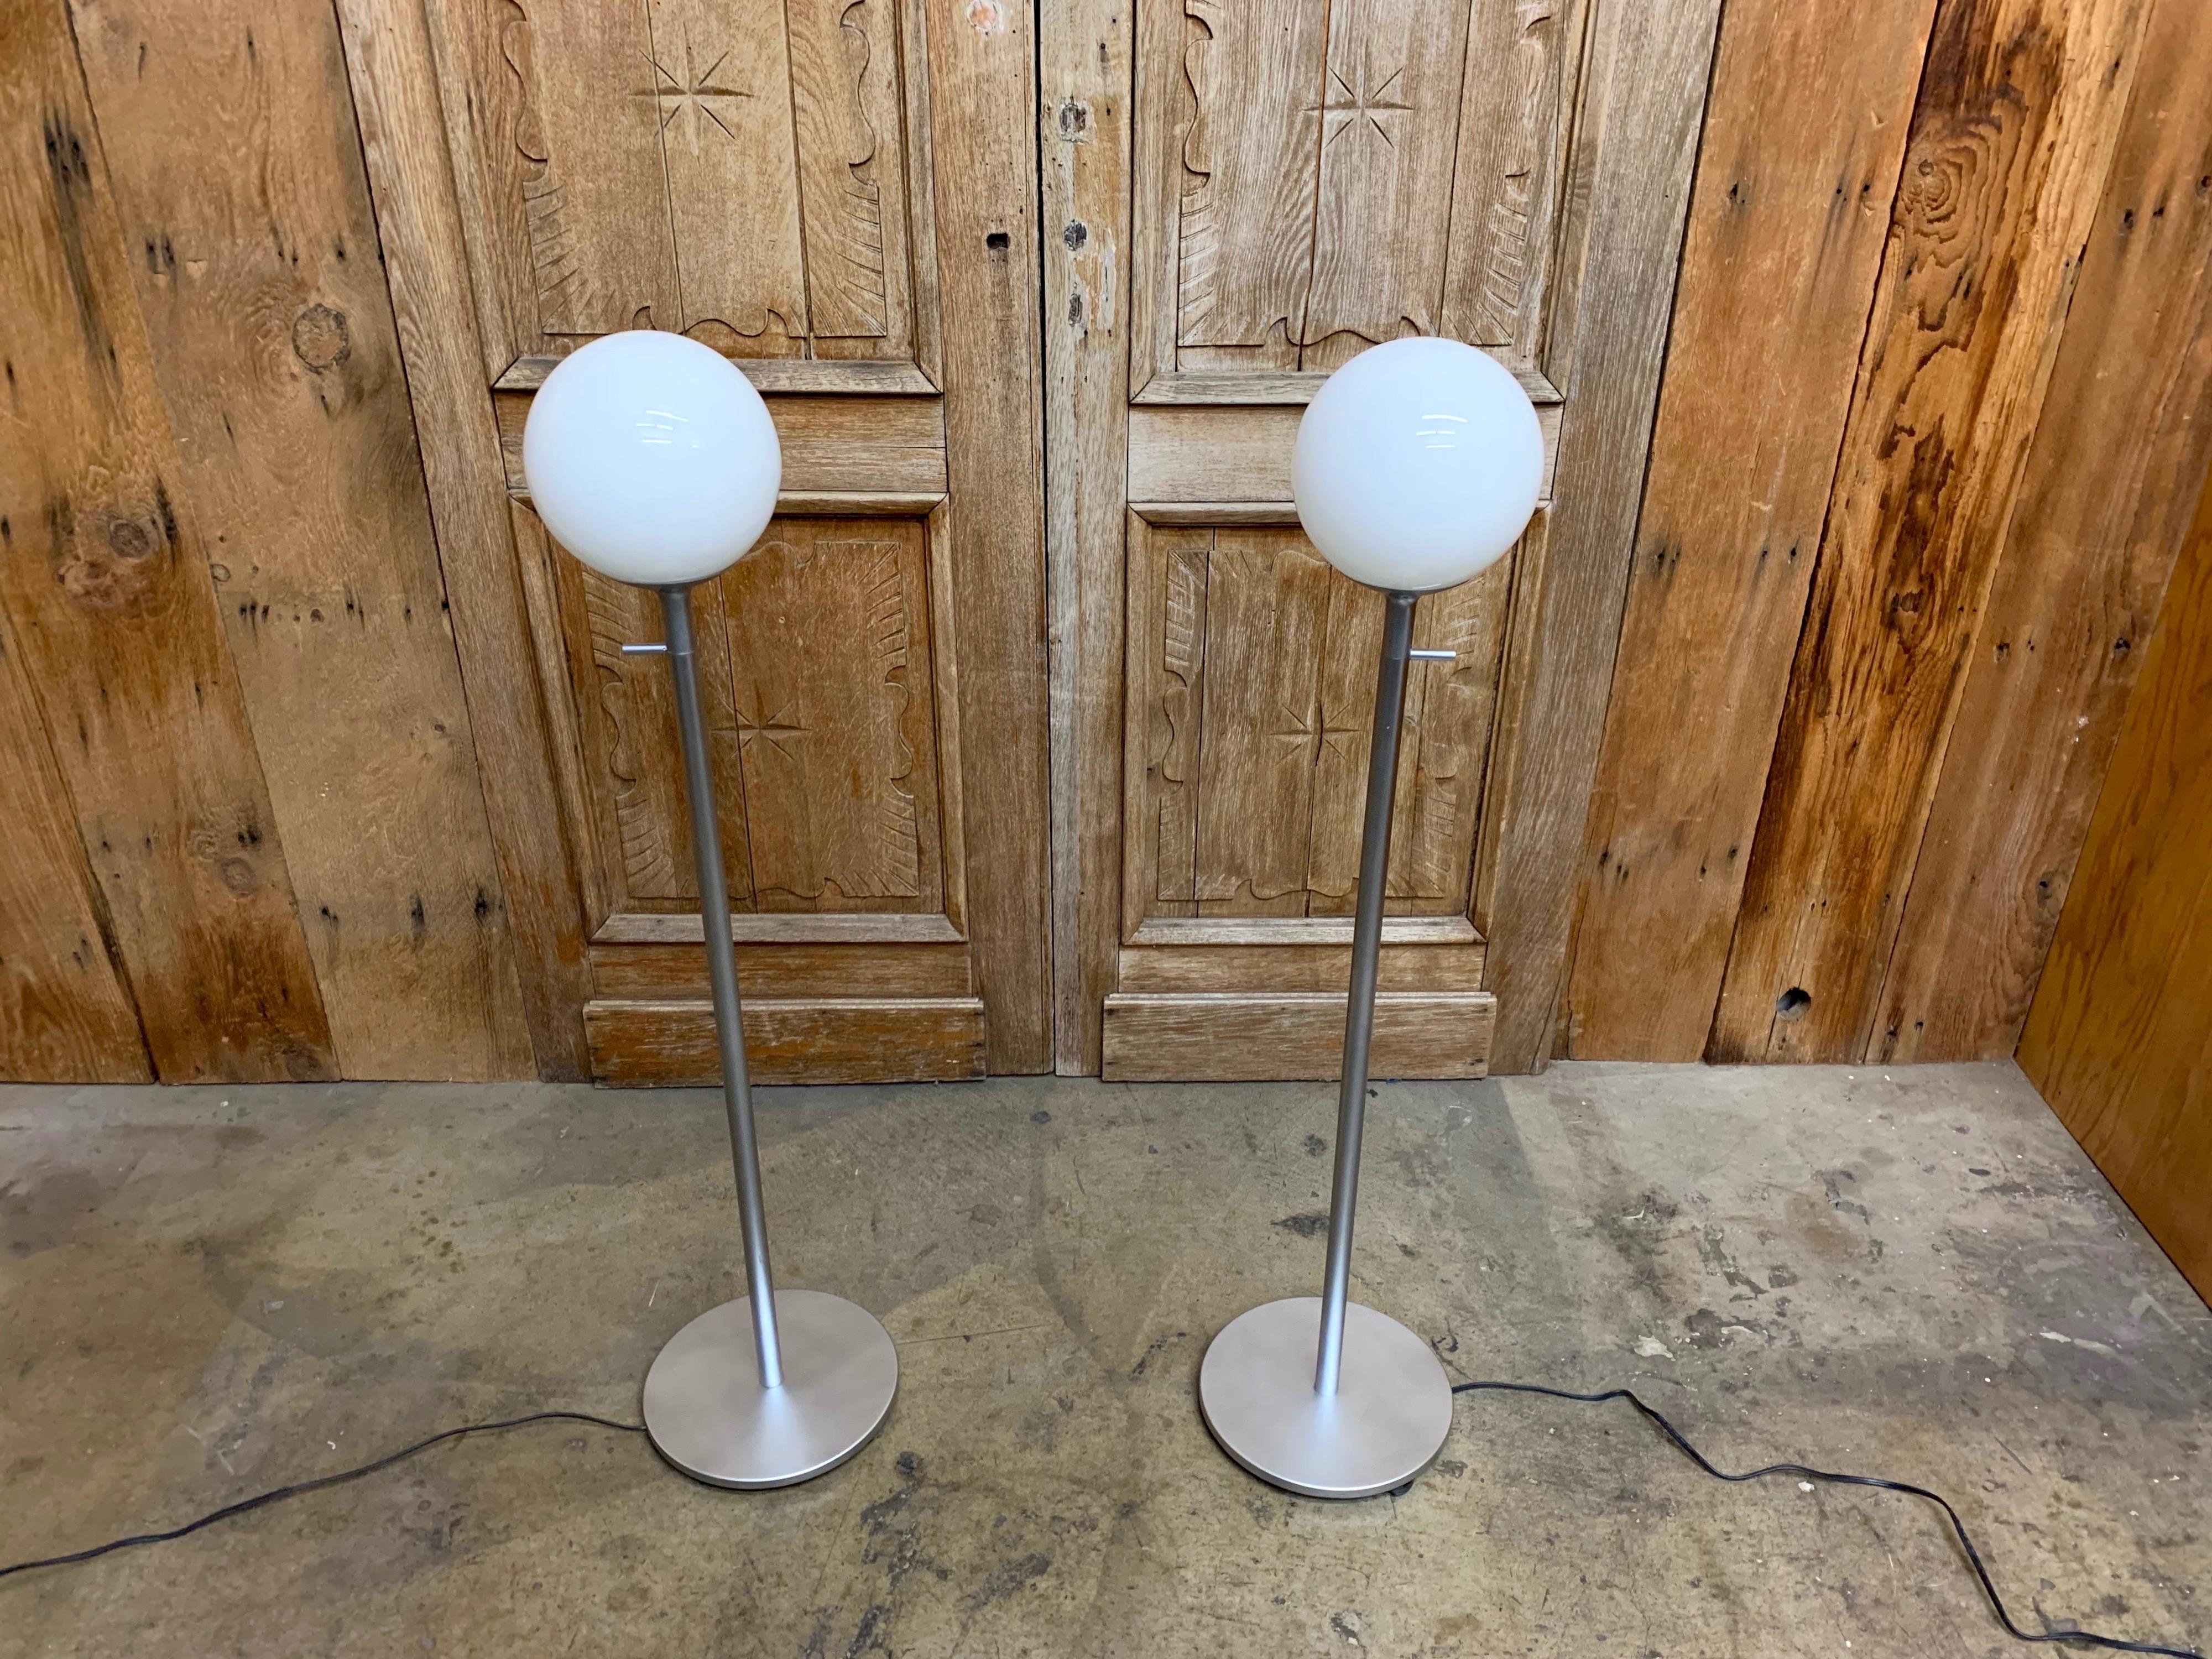 Vintage Globe Floor Lamps by ClassiCon 1